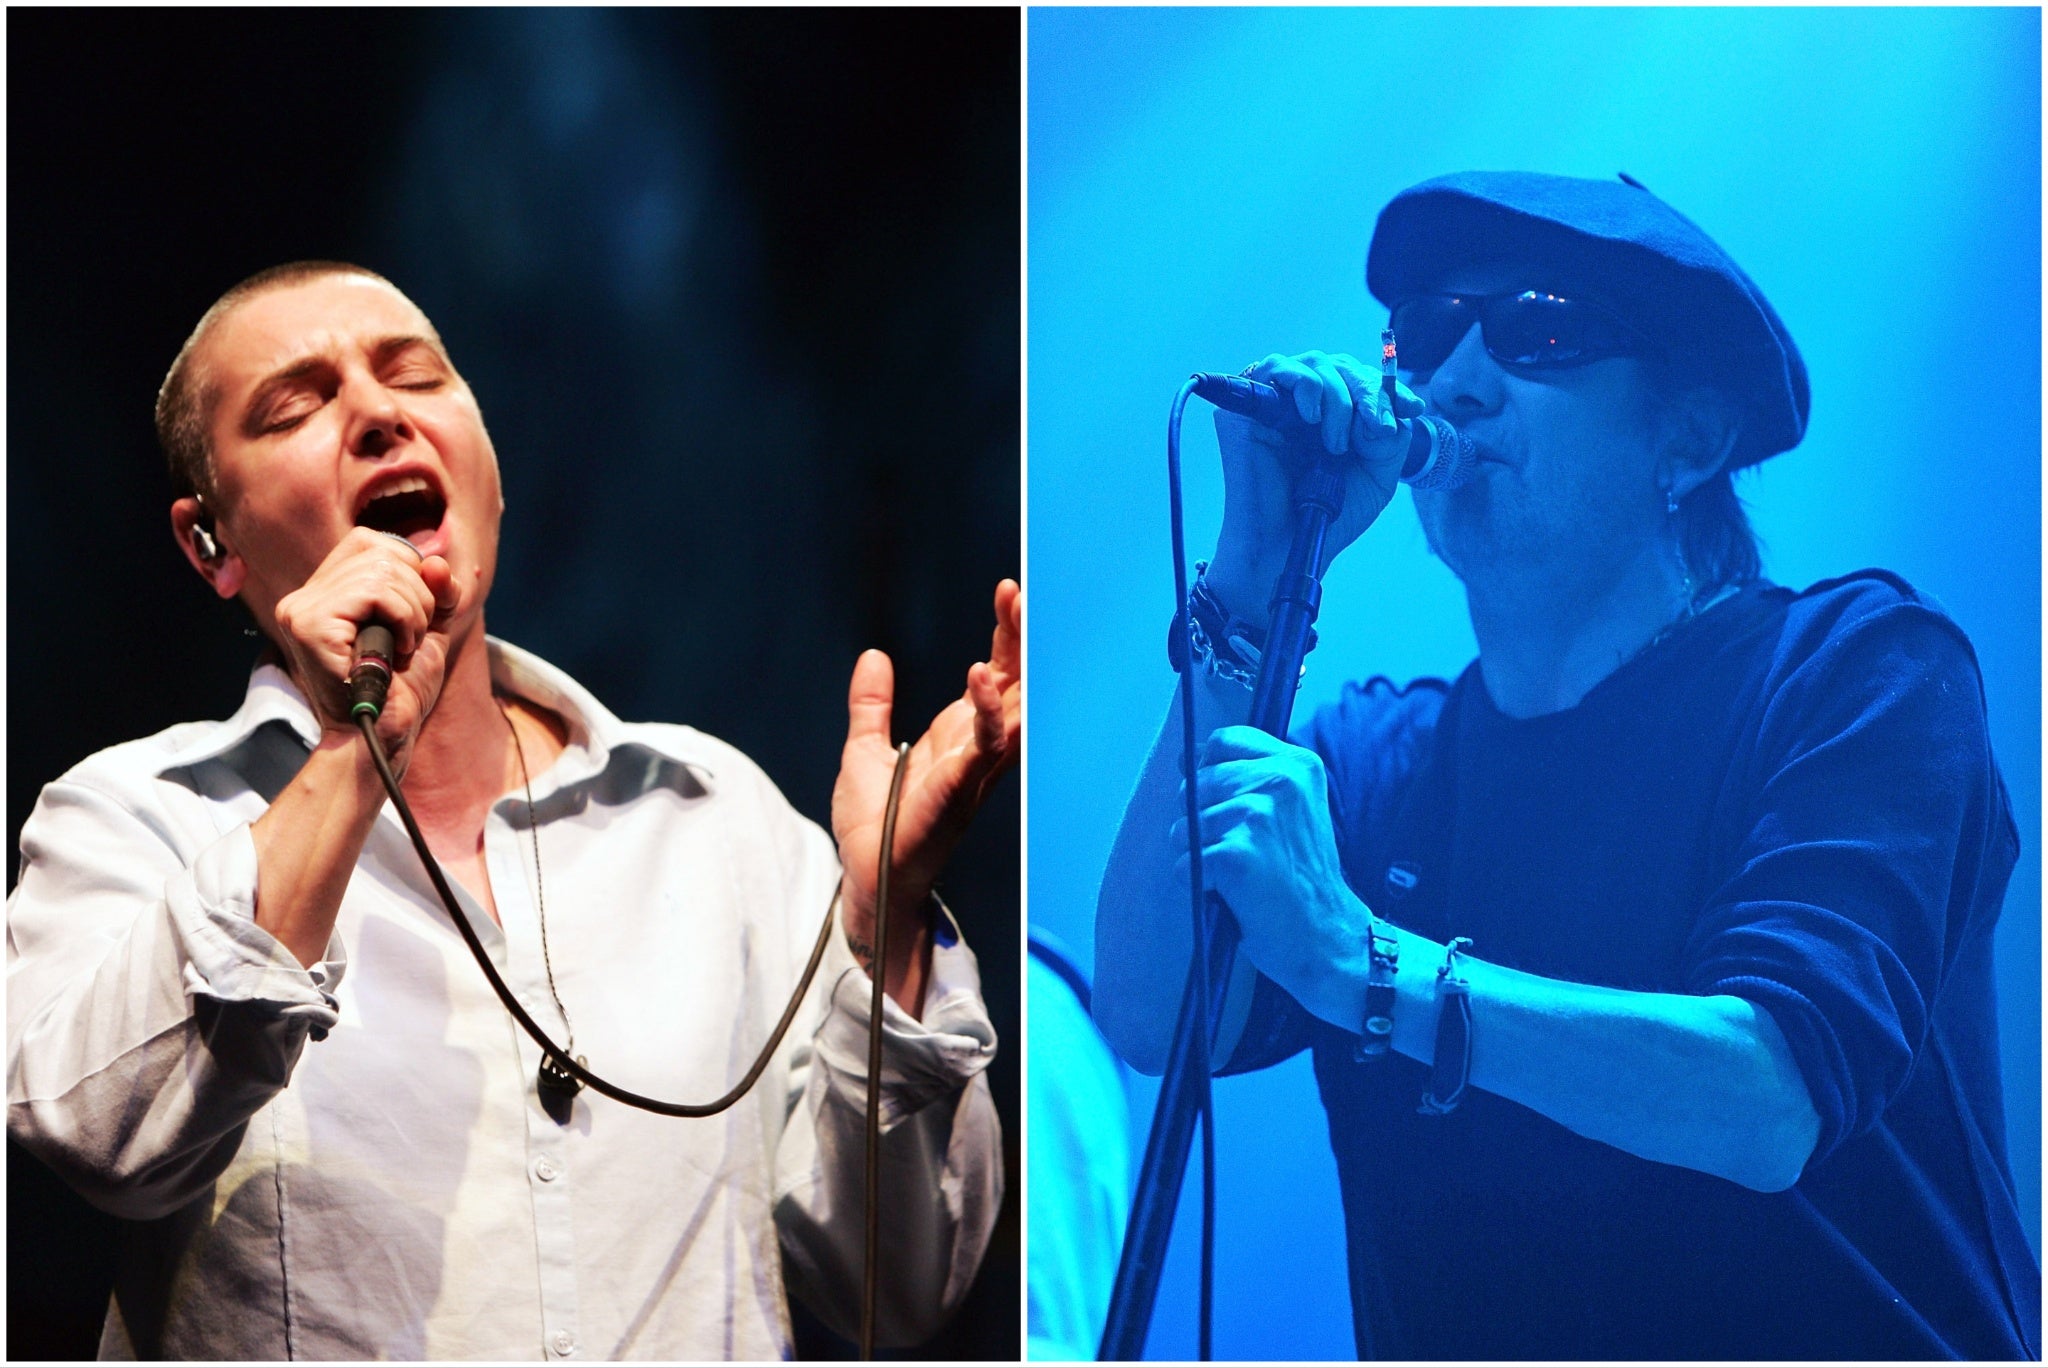 Musicians will pay tribute to Sinead O’Connor and Shane MacGowan in March